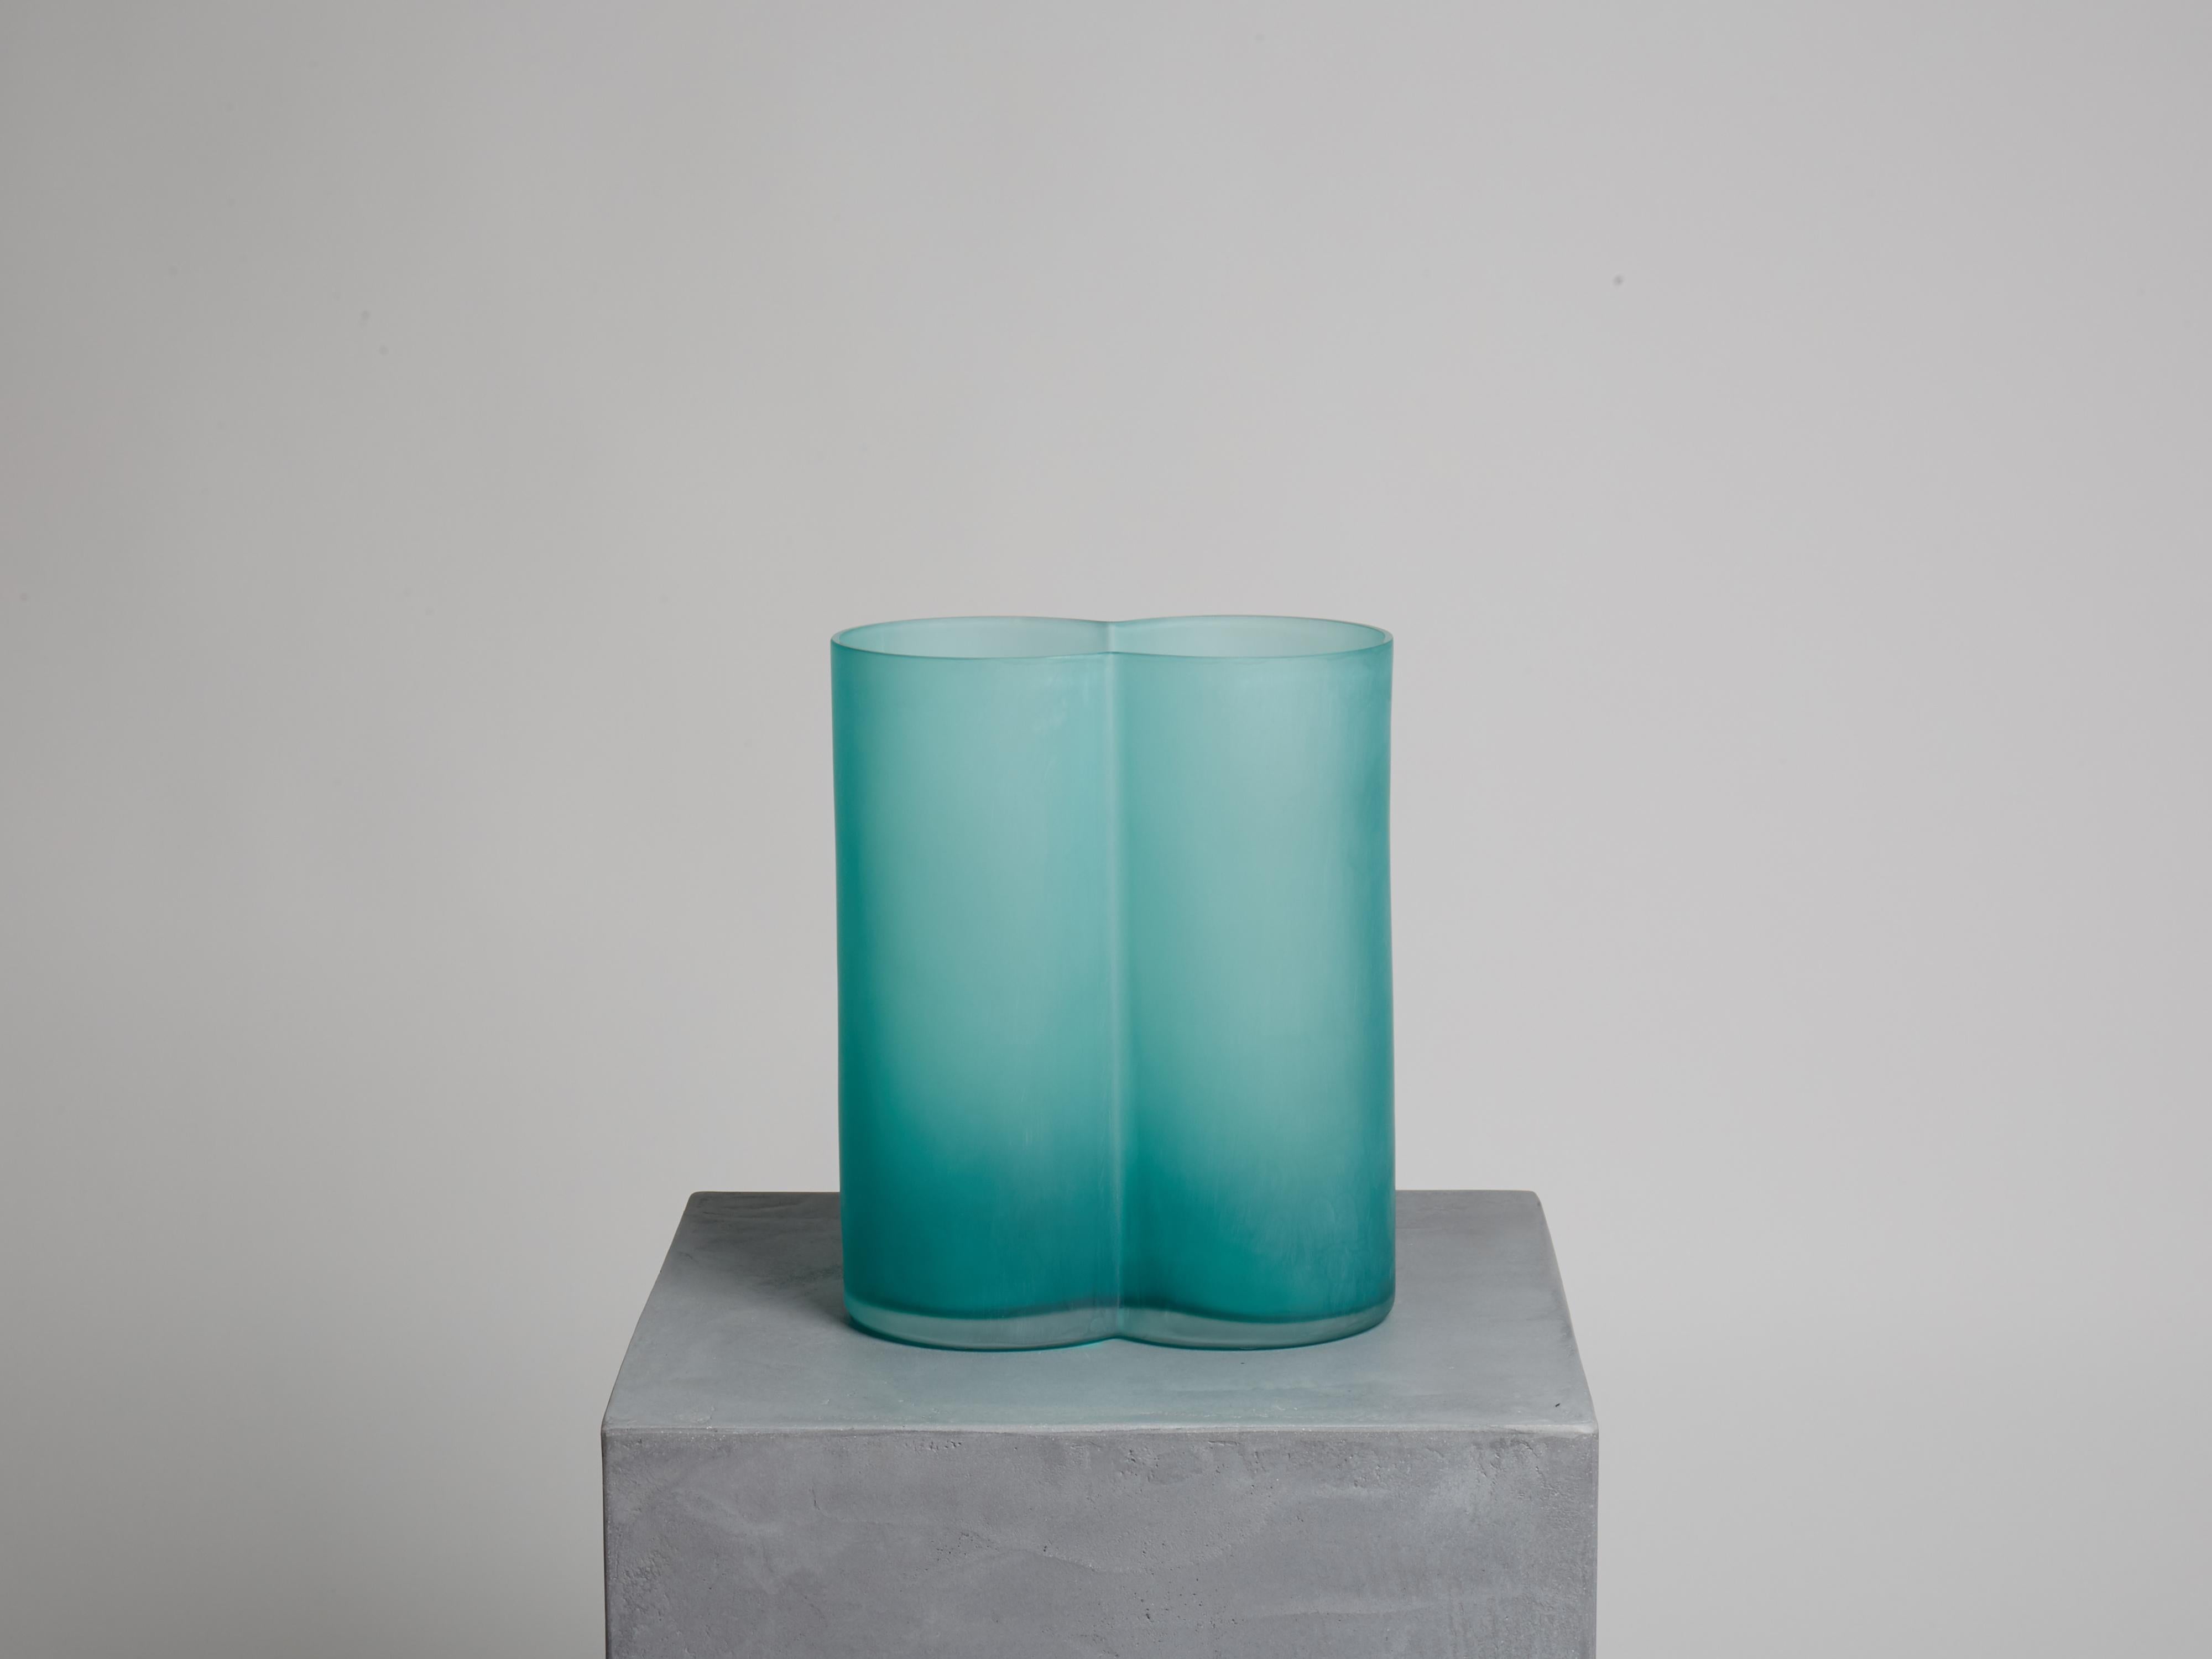 Materials: murano glass, satin finish

Colours: emerald green; also available in cobalt blue or ochre yellow

In January 2017 Calori & Maillard took part to Art City, an event linked to Arte Fiera, with the solo show “Causerie – conversation”